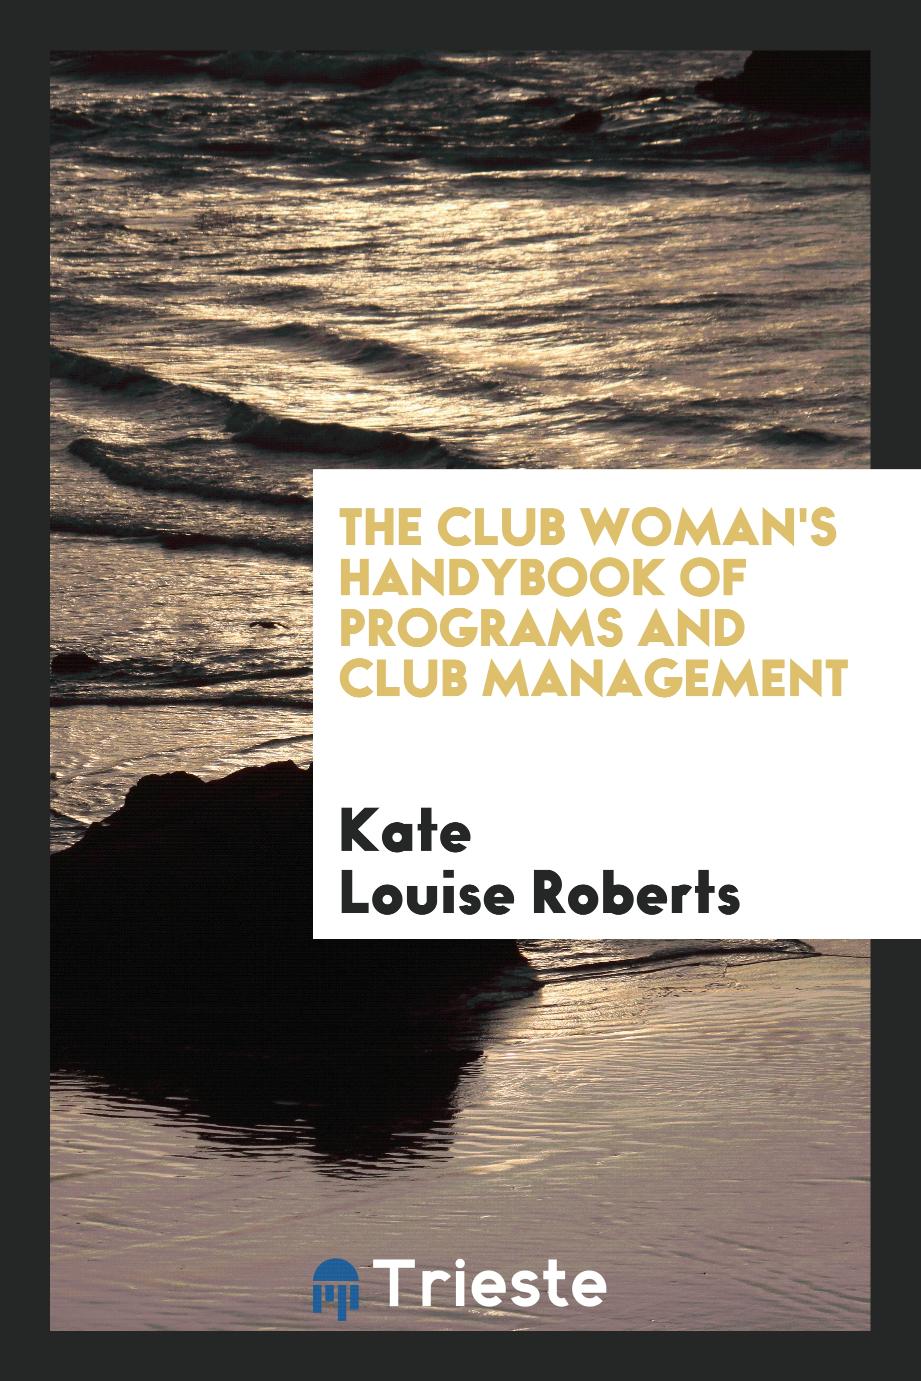 The Club Woman's Handybook of Programs and Club Management